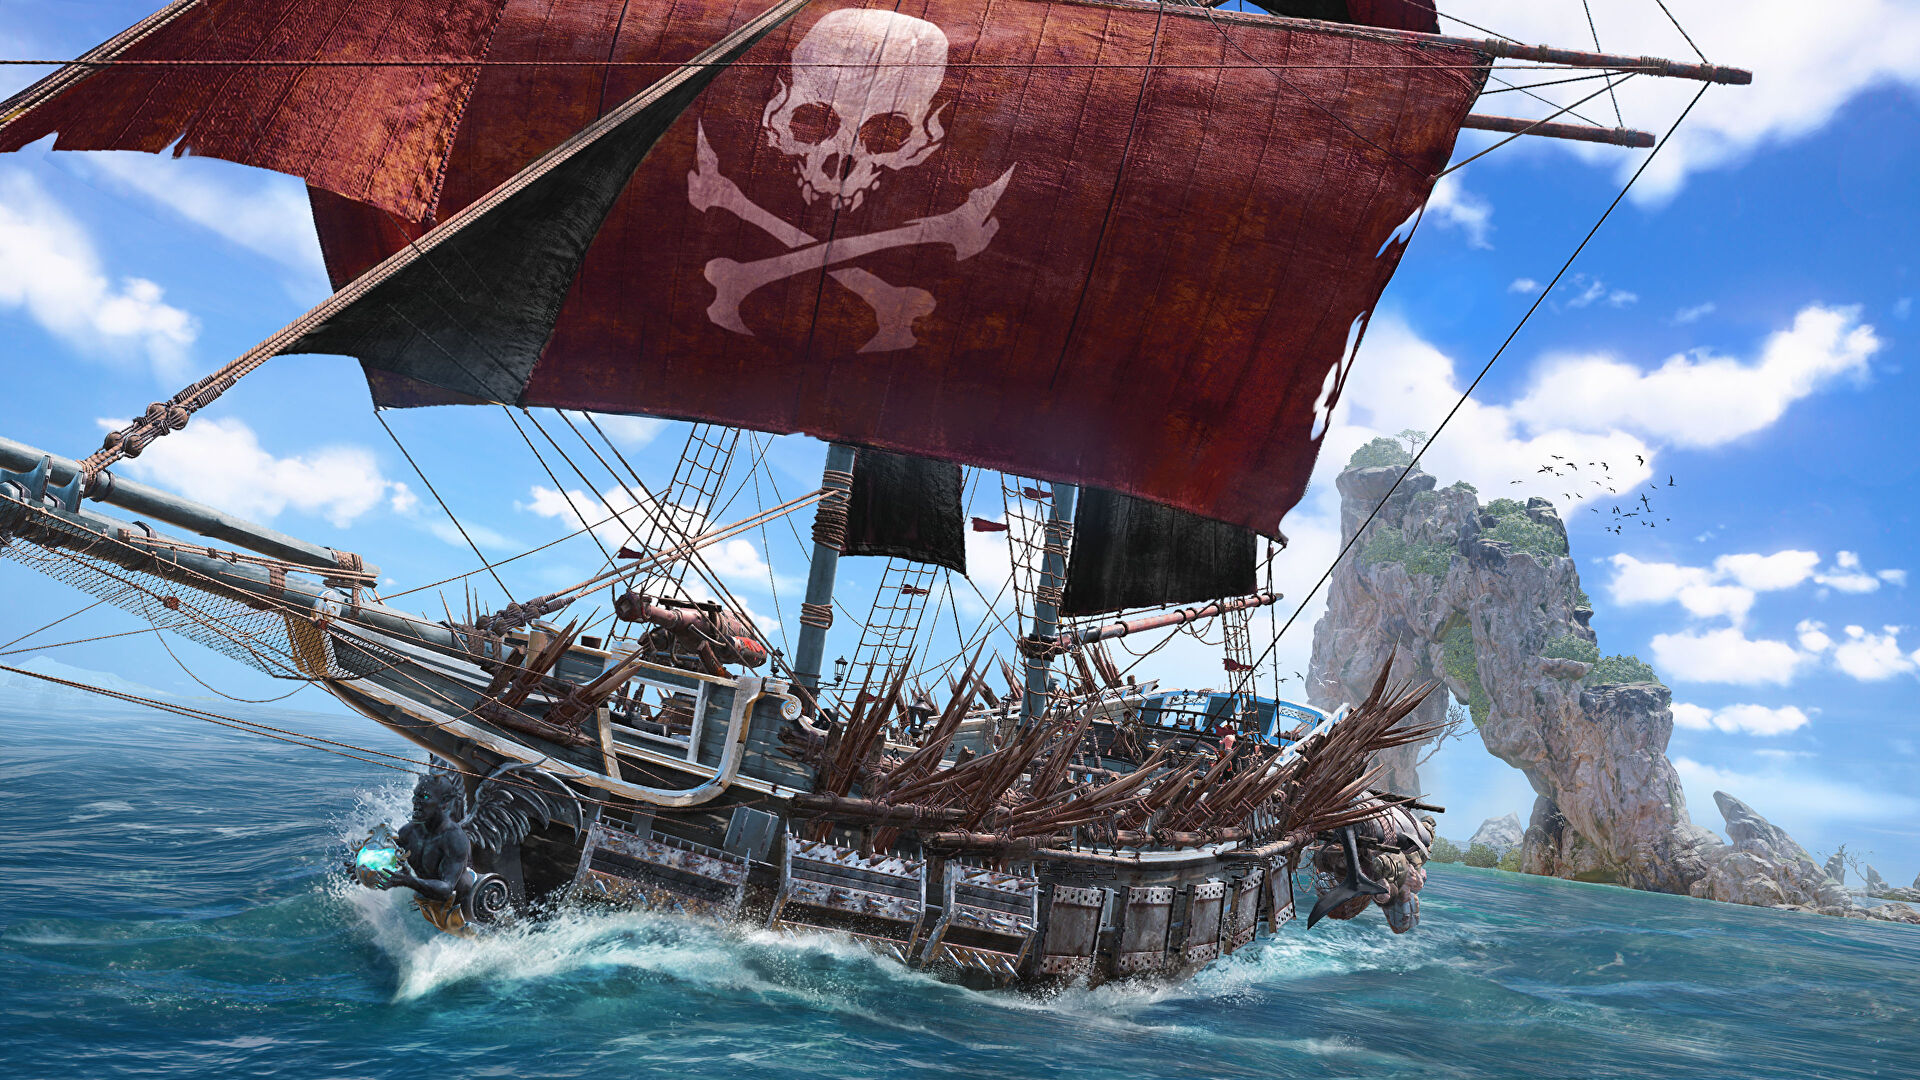 Skull And Bones will support 4K, ray tracing, and uncapped FPS on PC